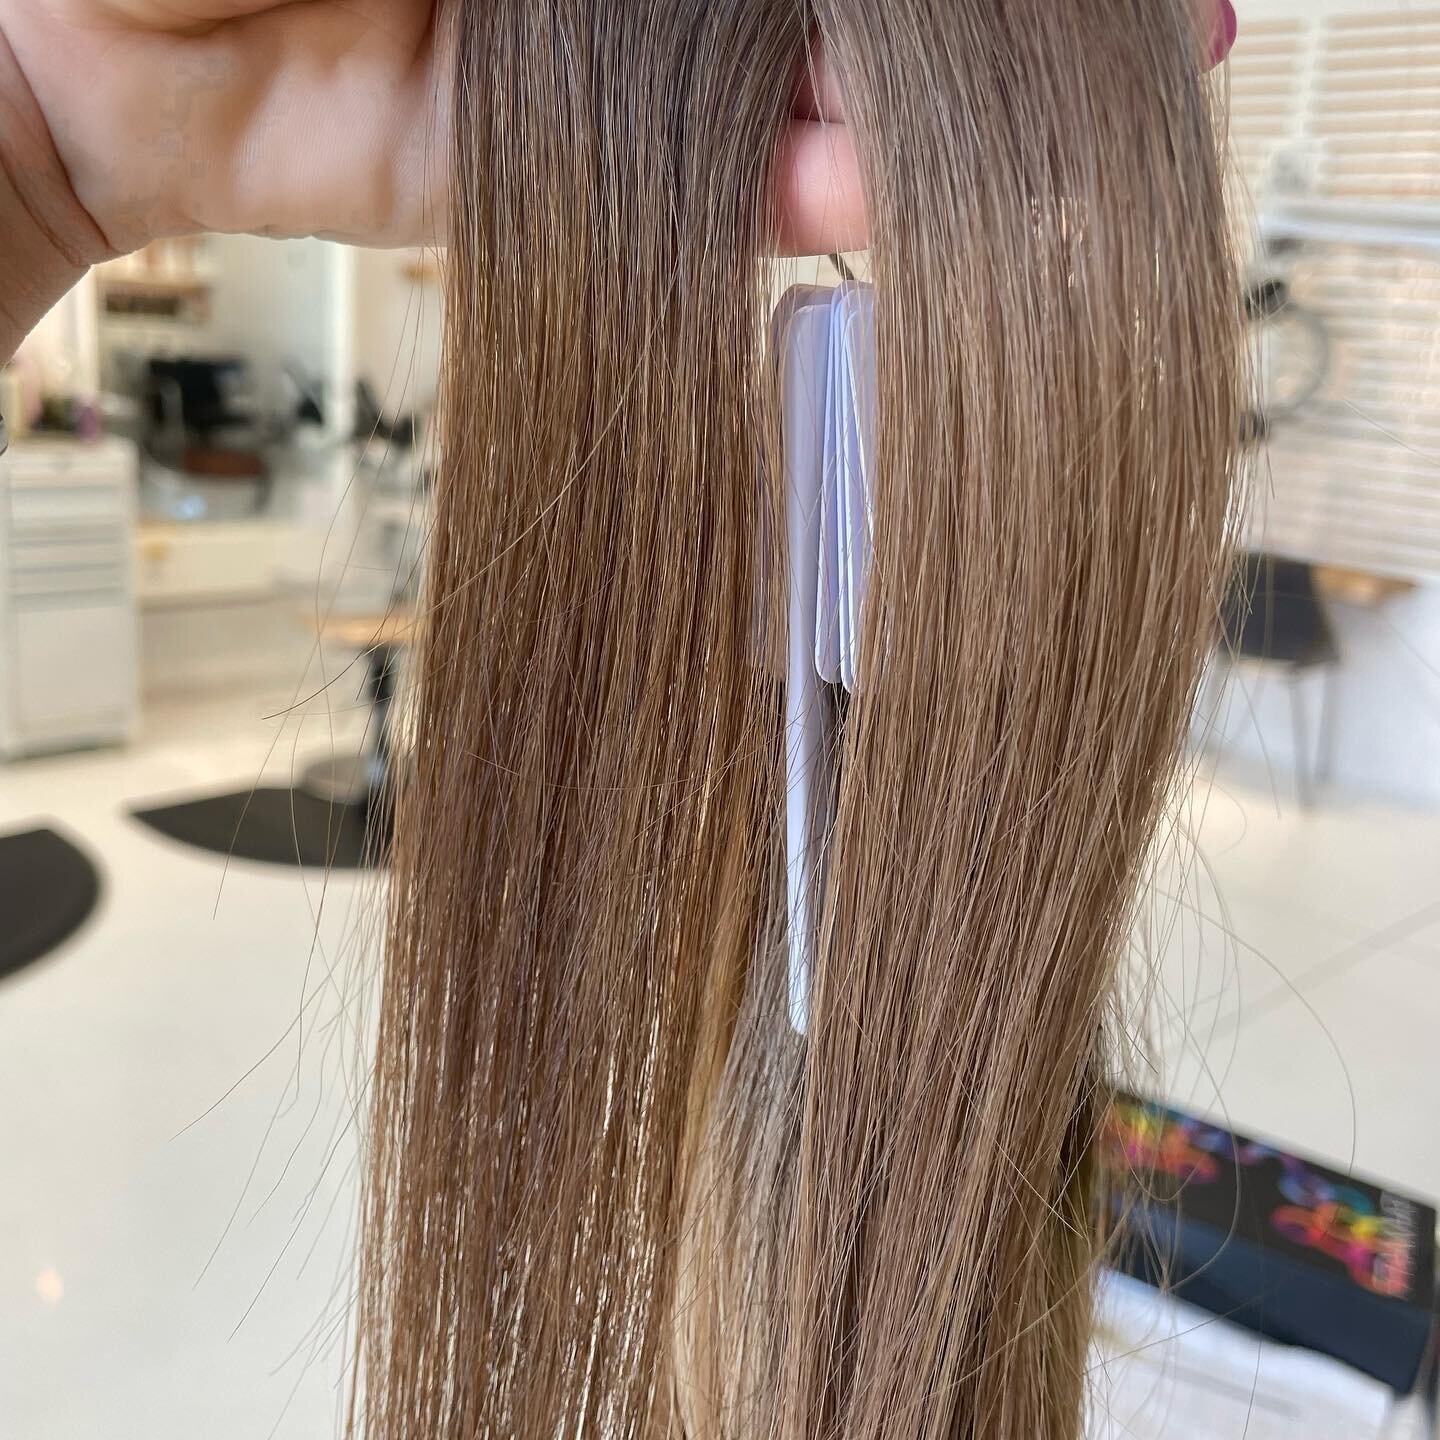 Your hair has multiple tones, so should your extensions. Even if just one shade of difference, I always use a more than one color. 
#itsinthedetails
#luxuryhairextensions